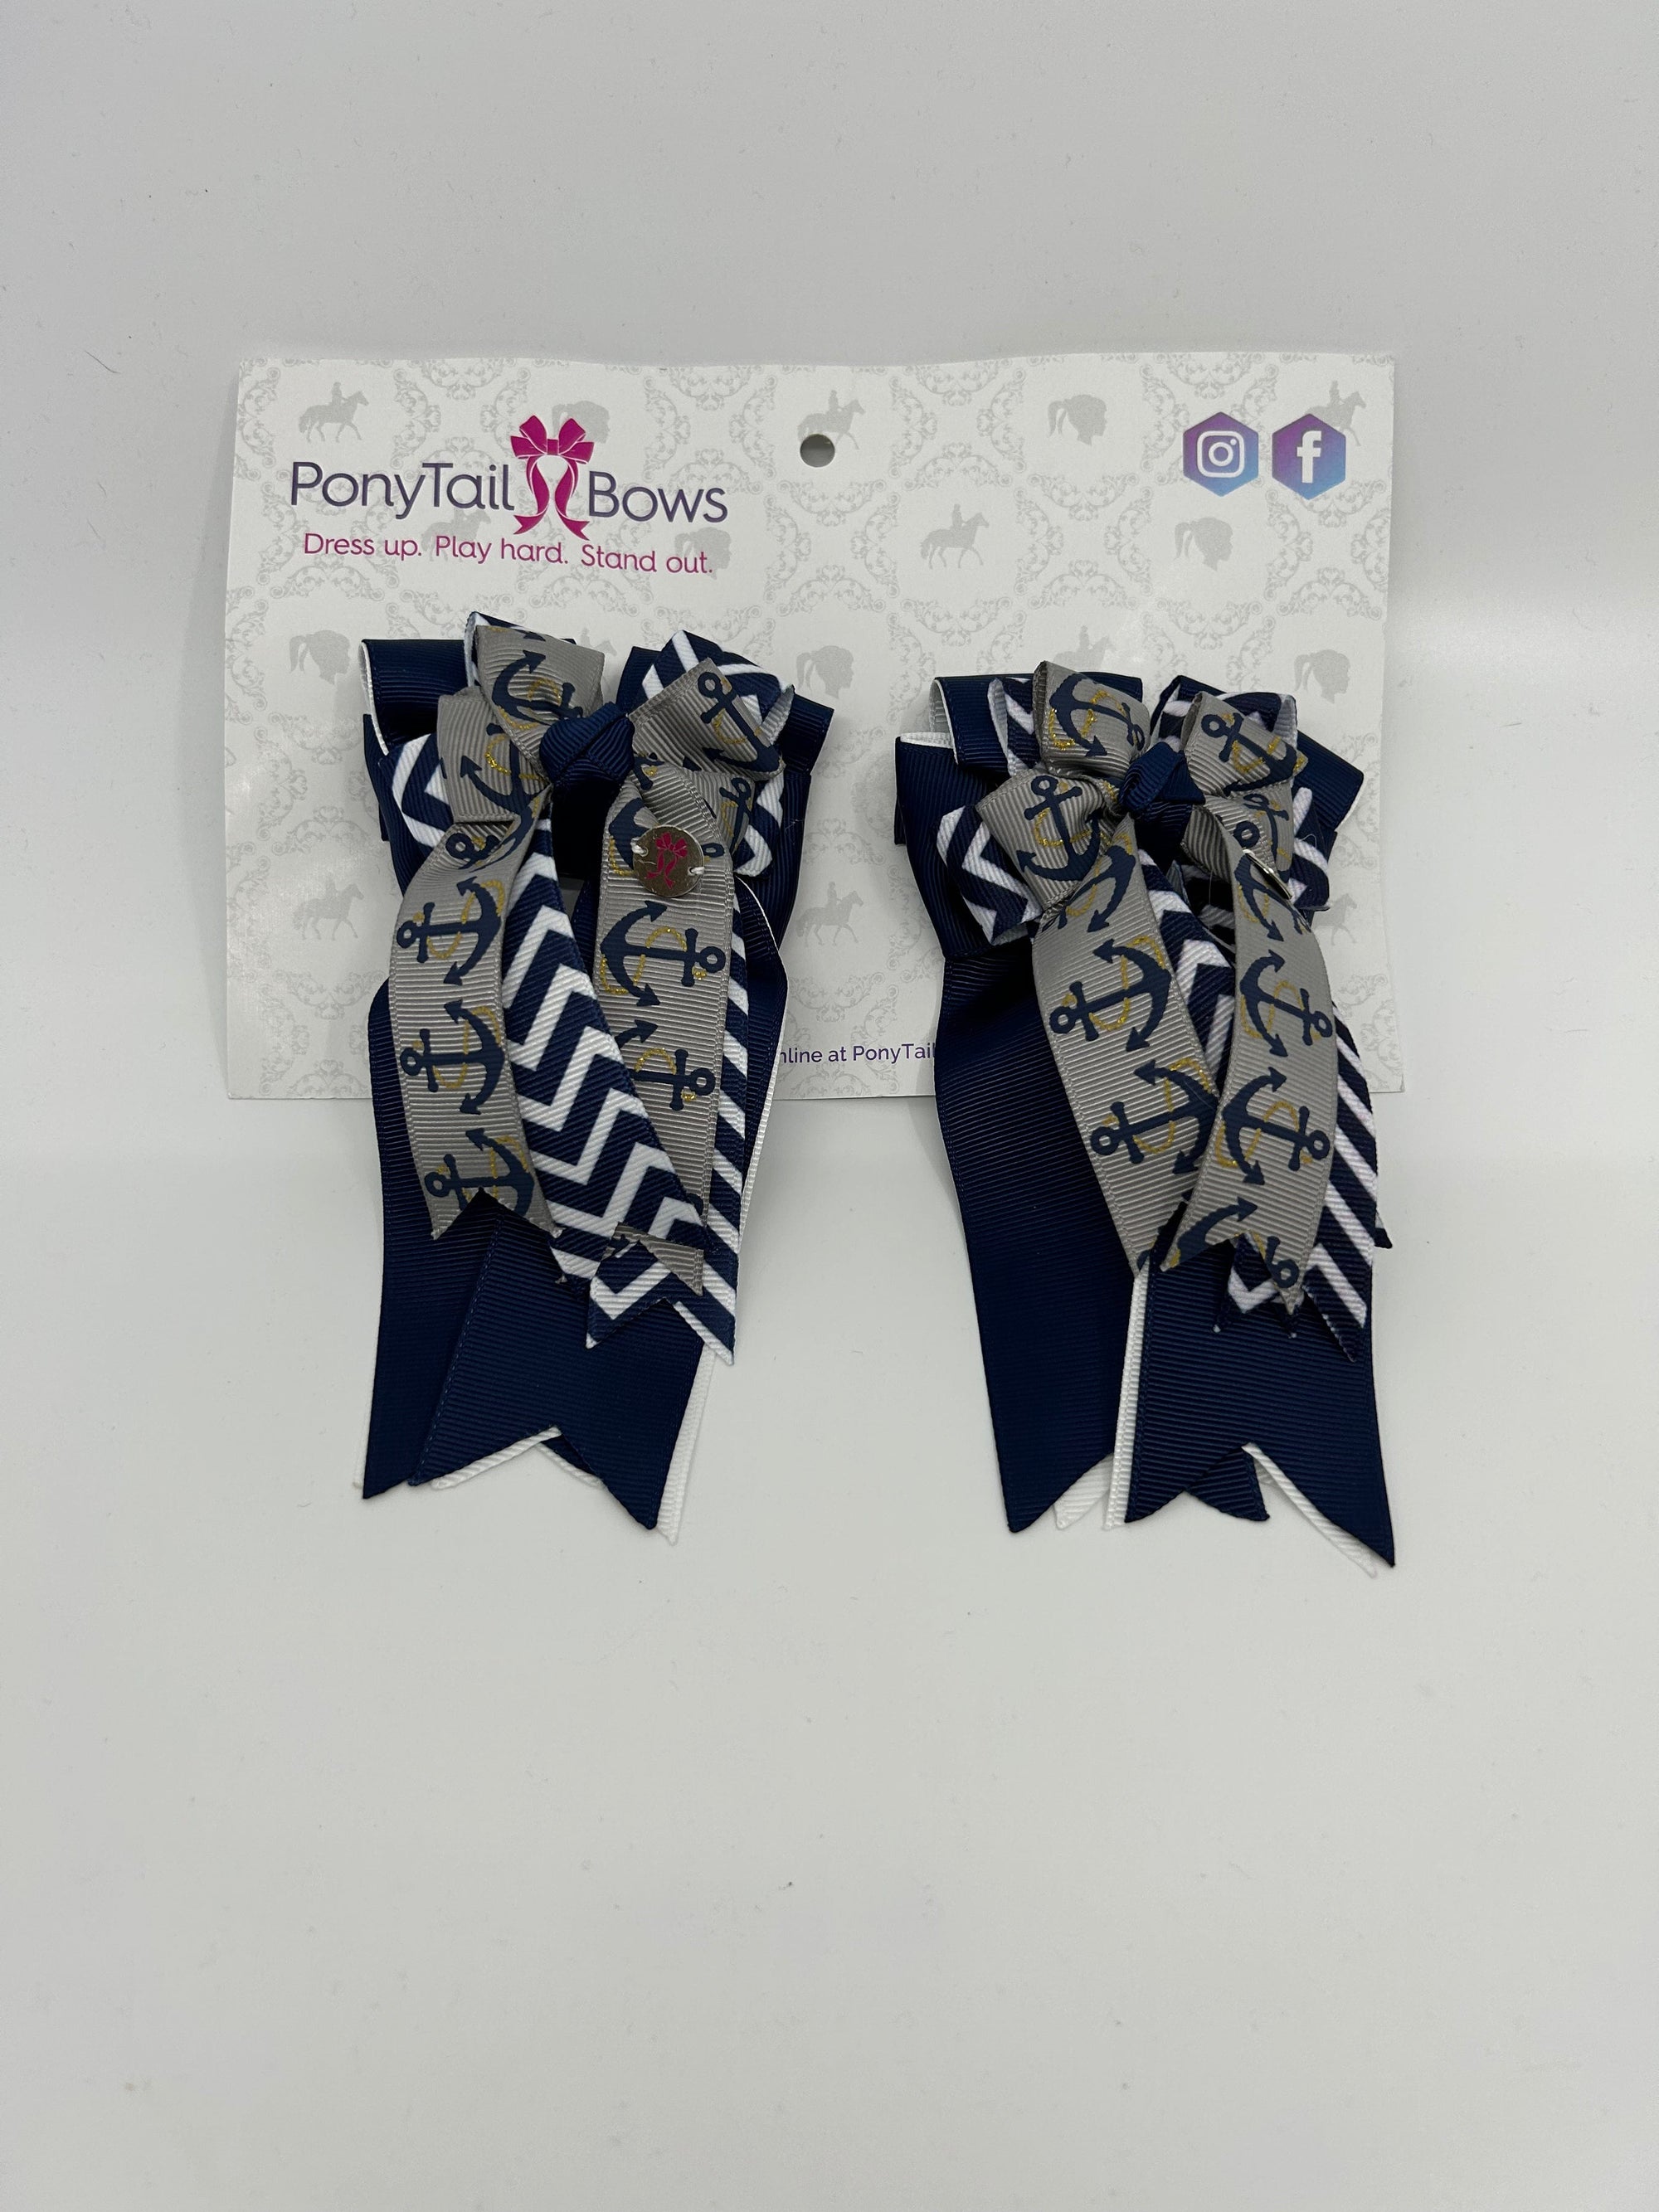 PonyTail Bows 3" Tails Ancors Away PonyTail Bows equestrian team apparel online tack store mobile tack store custom farm apparel custom show stable clothing equestrian lifestyle horse show clothing riding clothes PonyTail Bows | Equestrian Hair Accessories horses equestrian tack store